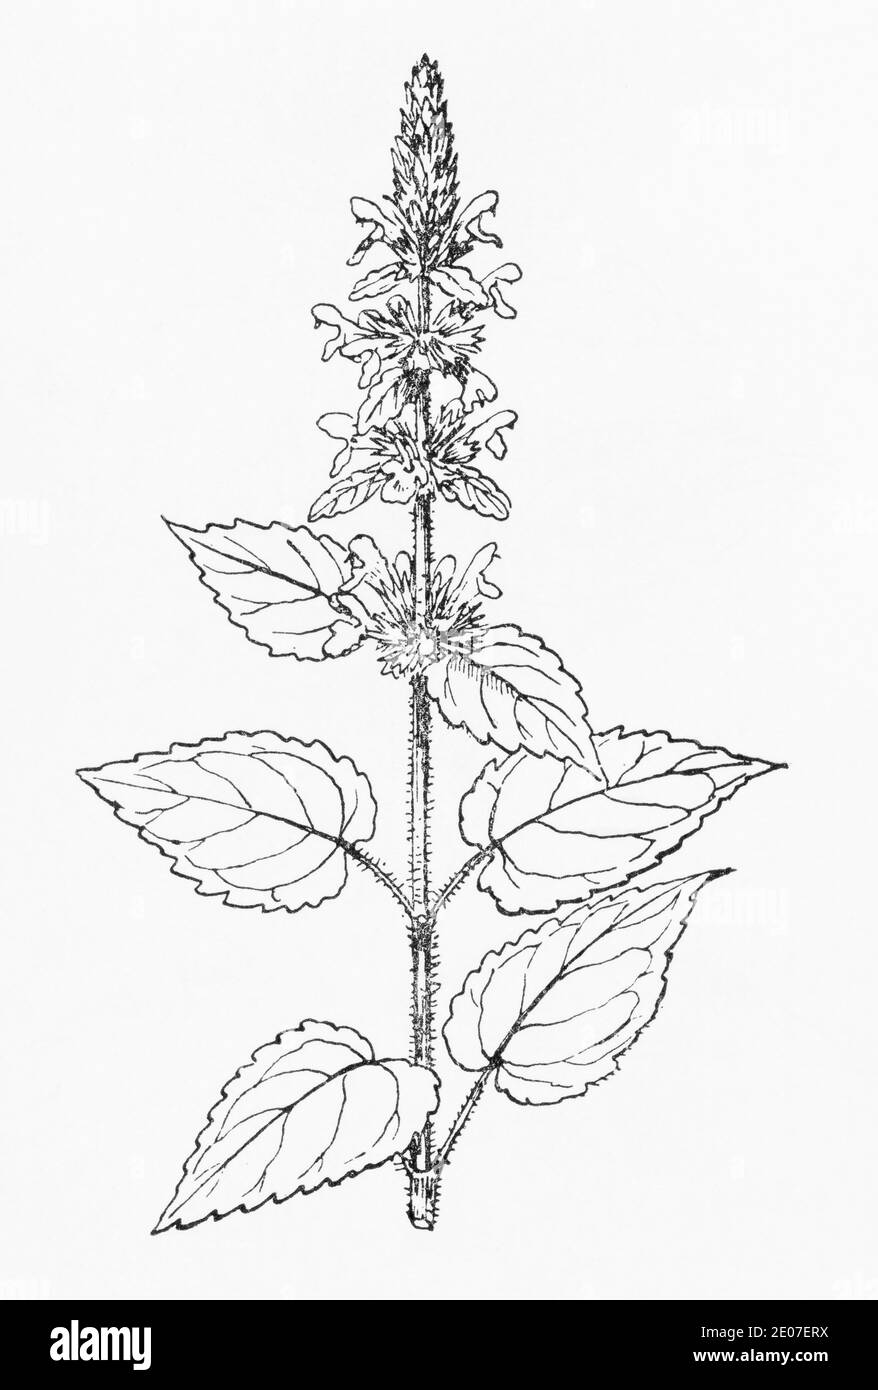 Old botanical illustration engraving of Hedge Woundwort / Stachys sylvatica. Traditional medicinal herbal plant. See Notes Stock Photo